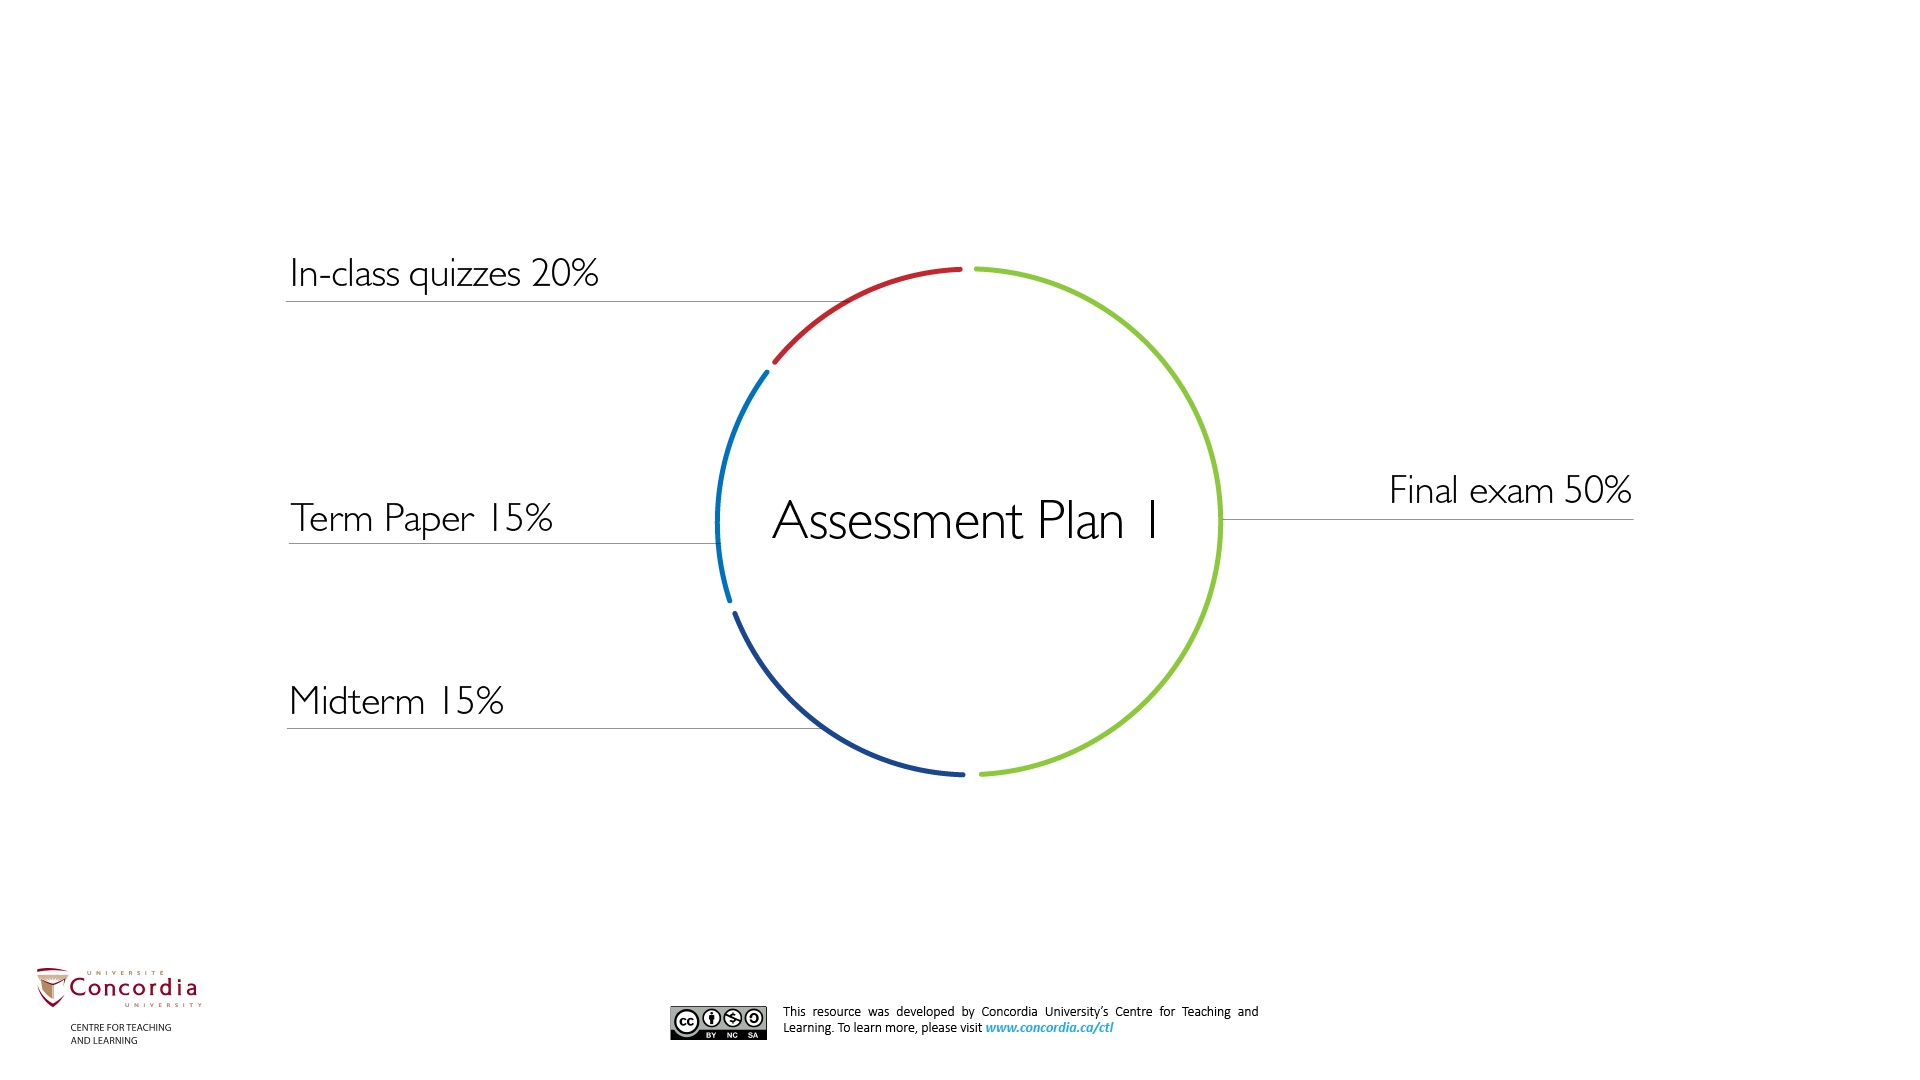 Assessment Plan 1 is an example of an assessment plan divided into 4 evaluations: In-class Quizzes valued at 20% of total grade, a Term Paper at 15%, a Midterm at 15% and a Final Exam worth 50% for a total grade of 100%.